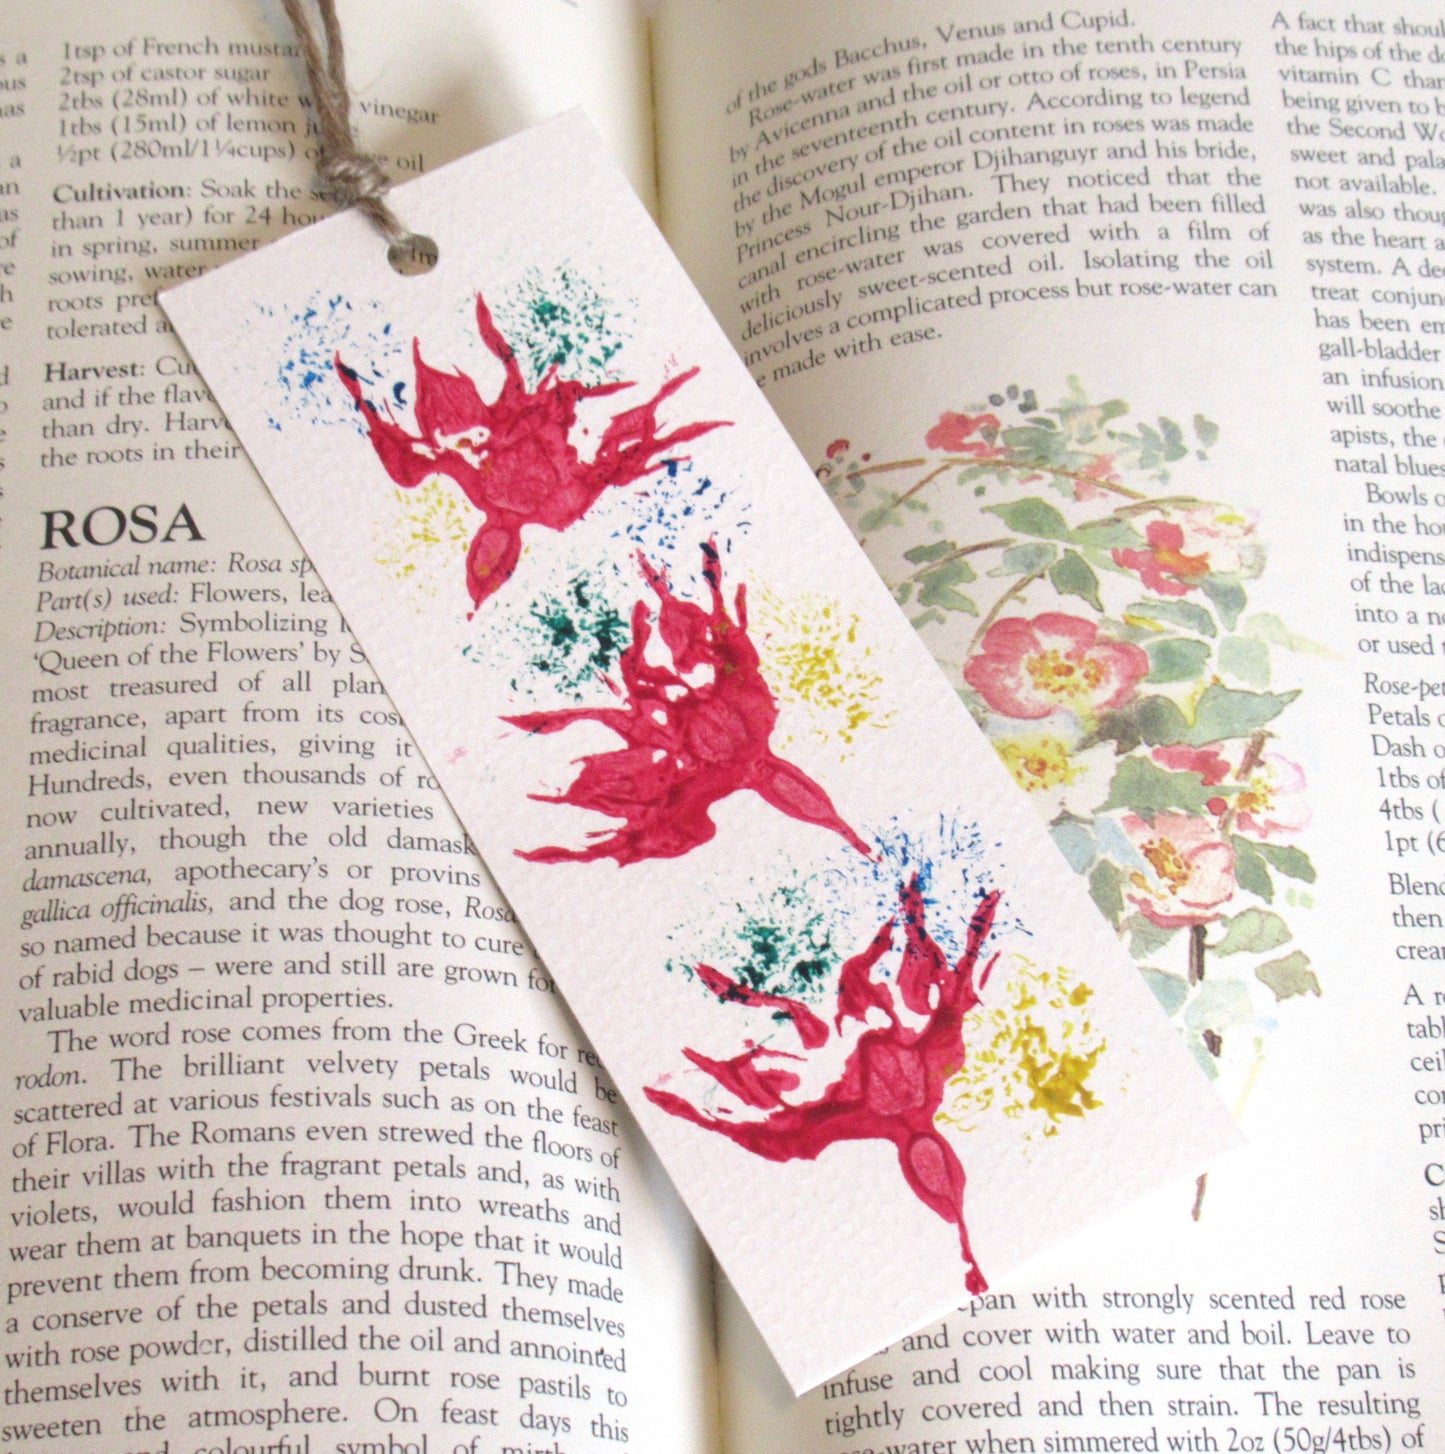 Bookmarks - Original Watercolour Floral Bookmark - Rose 1 (Stationery & More) (Literacy Project)